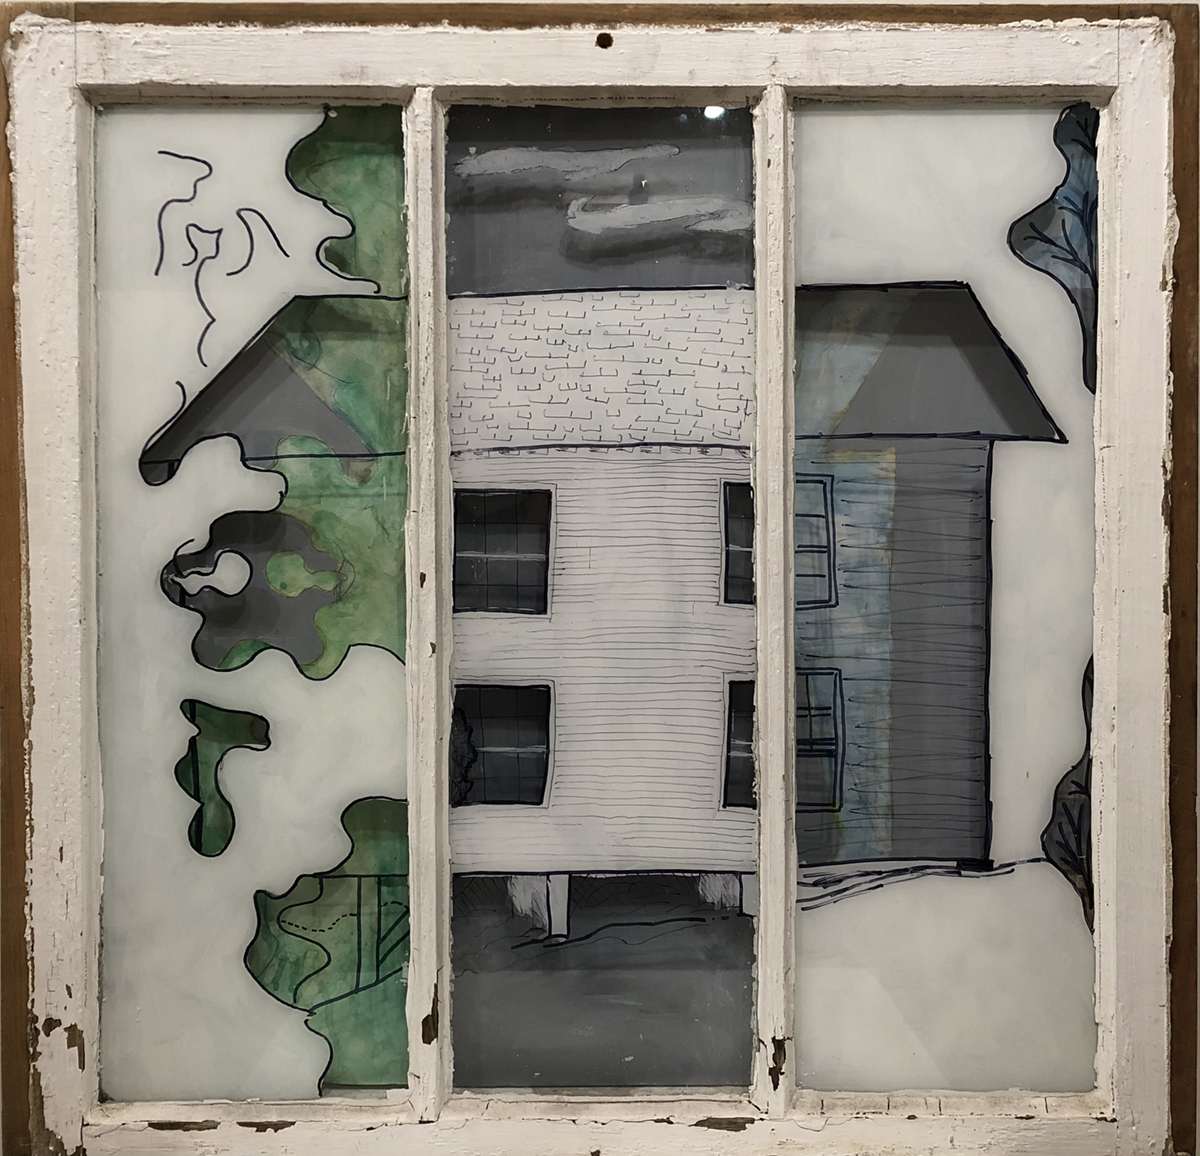 Photo of  A Study in Foreground, acrylic on glass, showing an image of a house across different glass and acrylic styles